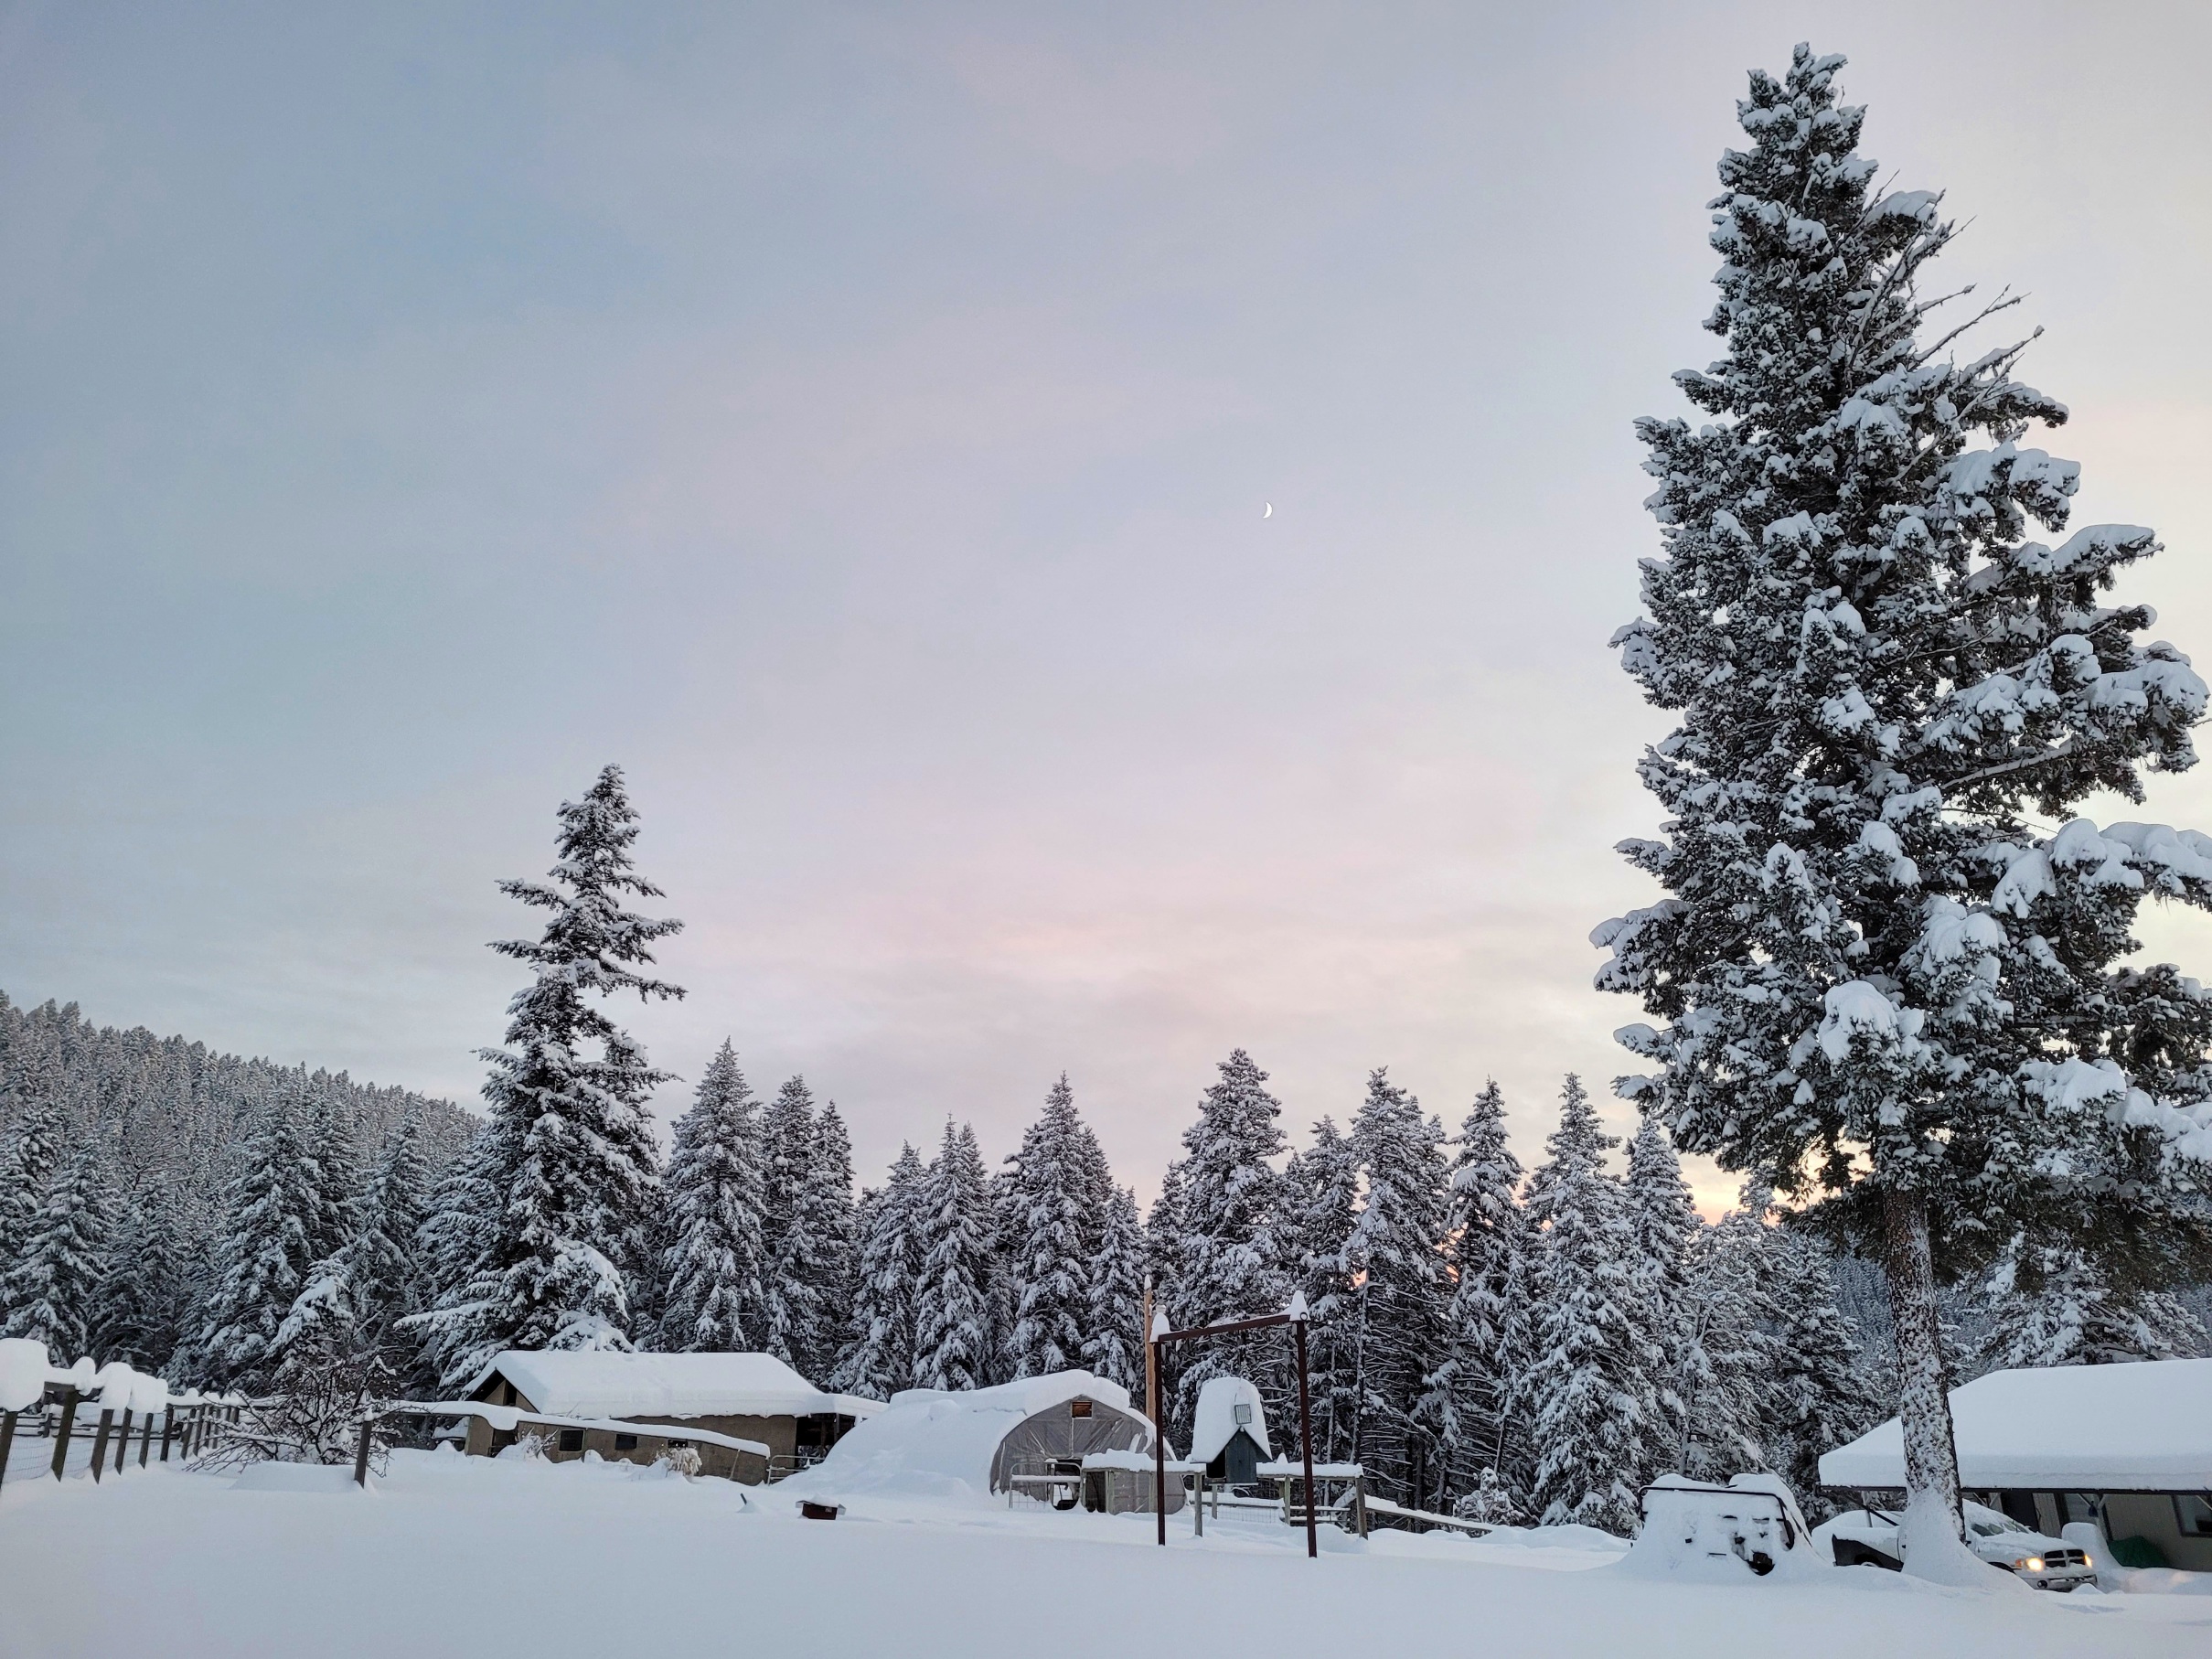 photo of ranch buildings in snow, under the last soft pinks of sunset